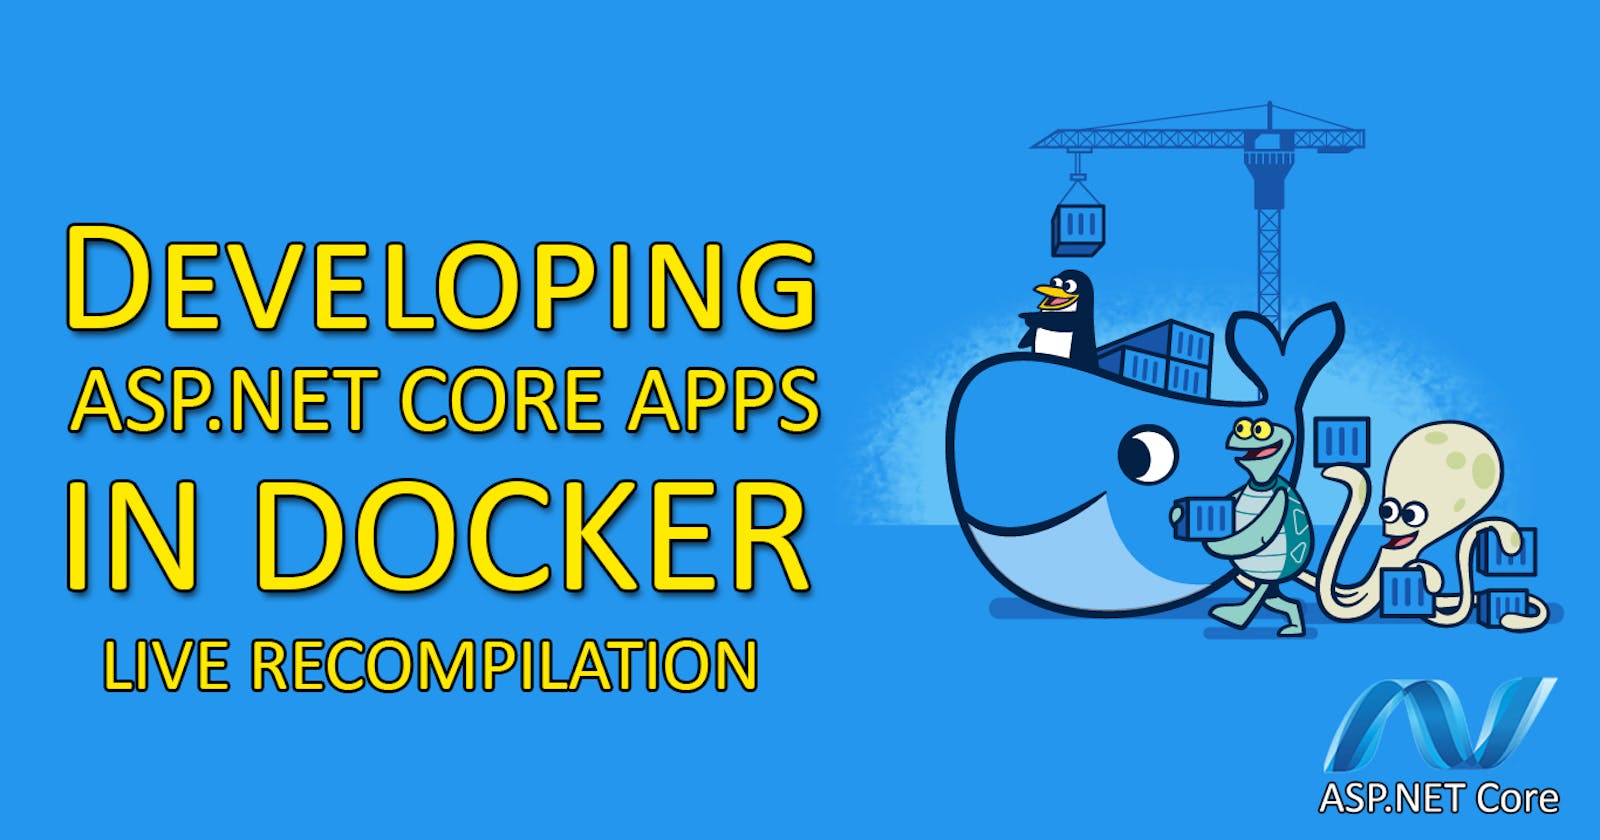 Developing ASP.NET Core apps in Docker - Live Recompilation